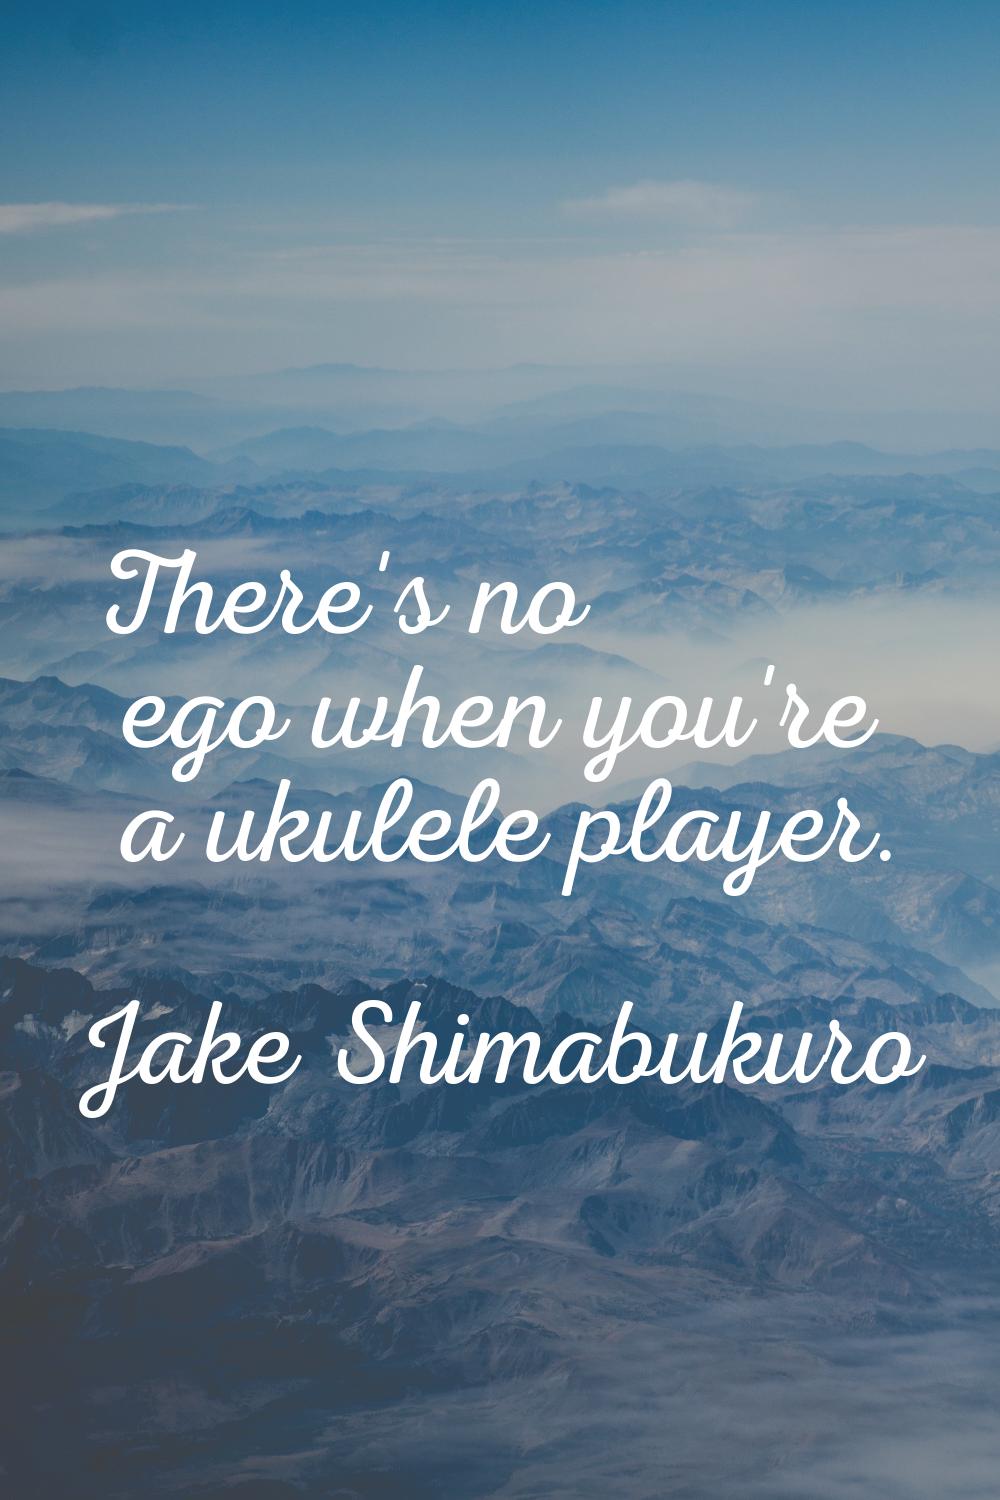 There's no ego when you're a ukulele player.